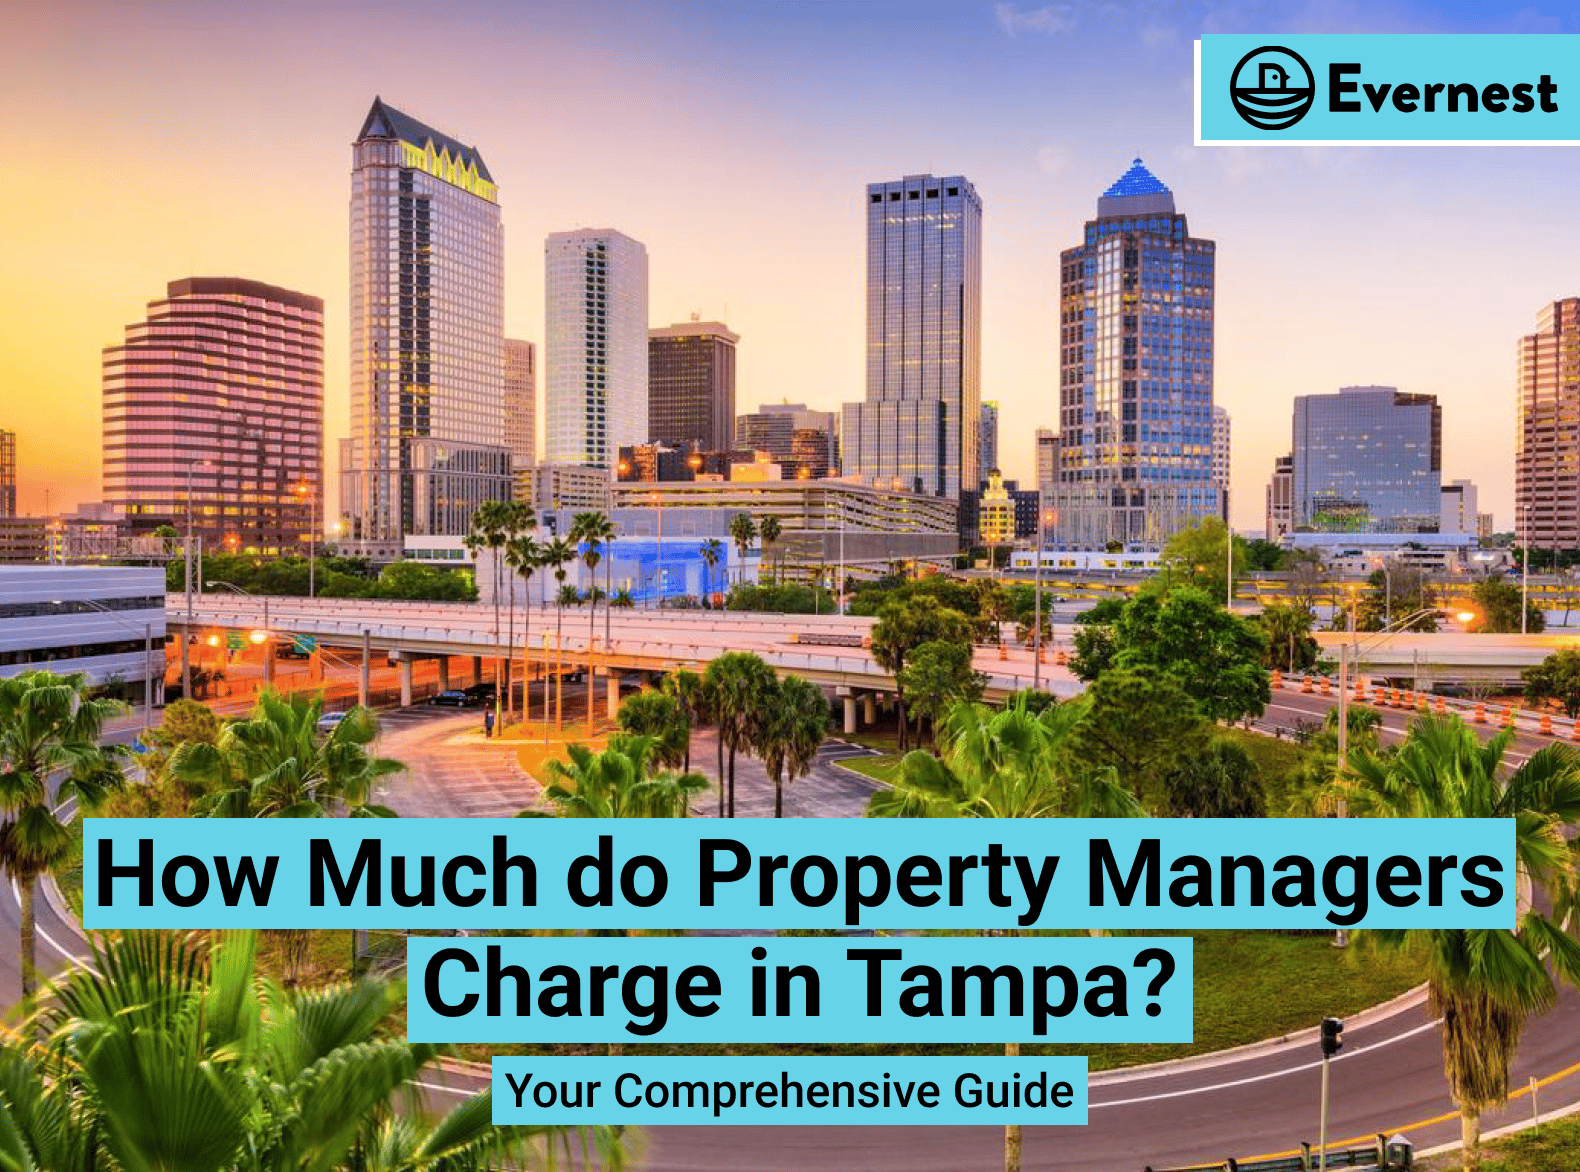 How Much do Property Managers Charge in Tampa?